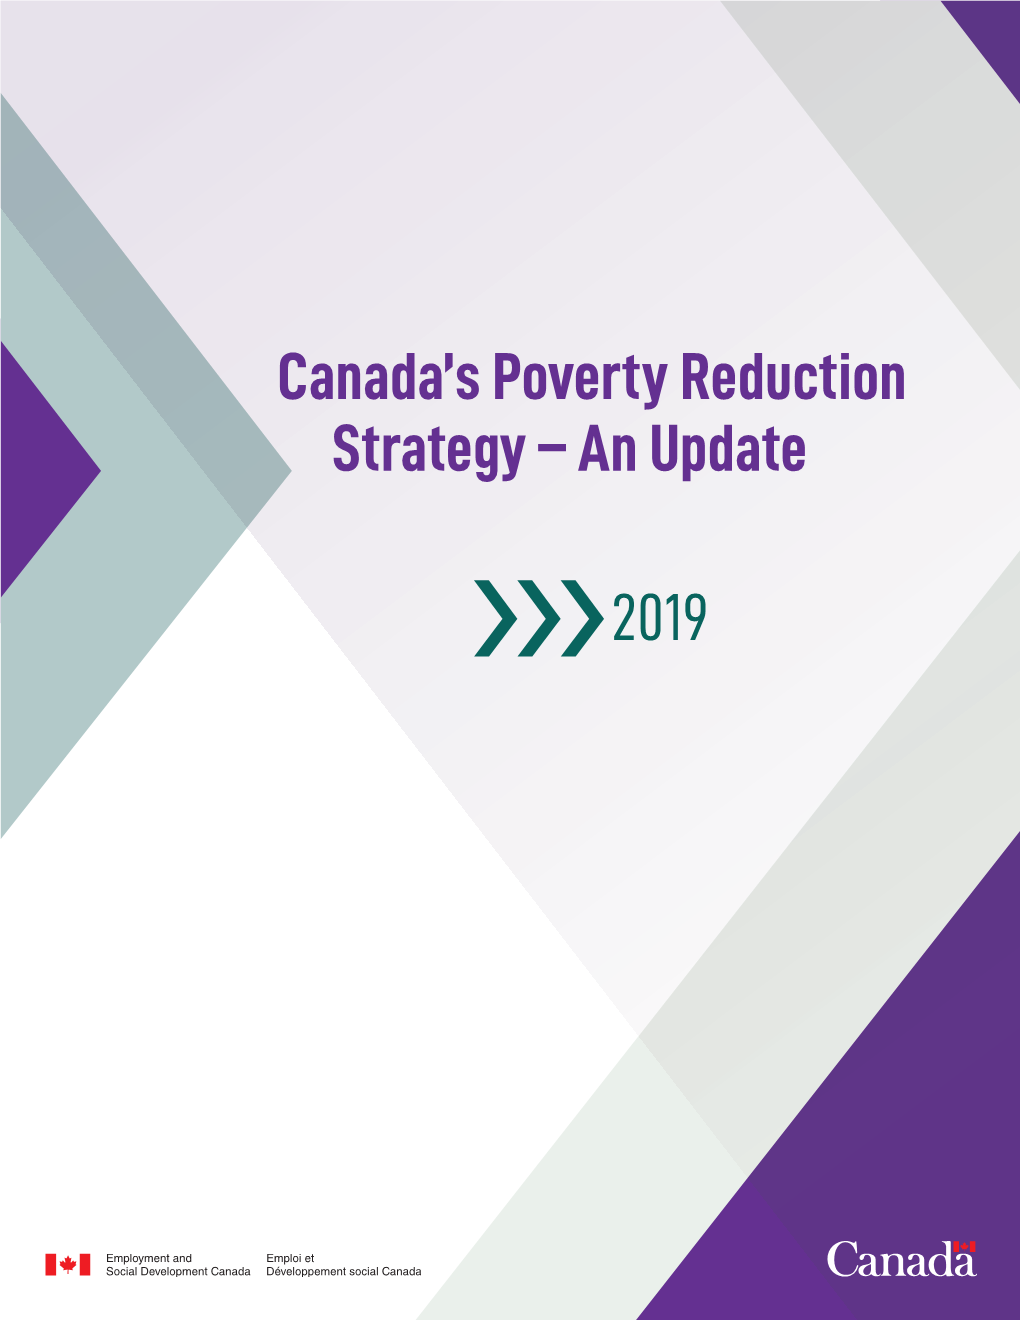 Canada's Poverty Reduction Strategy – an Update 2019